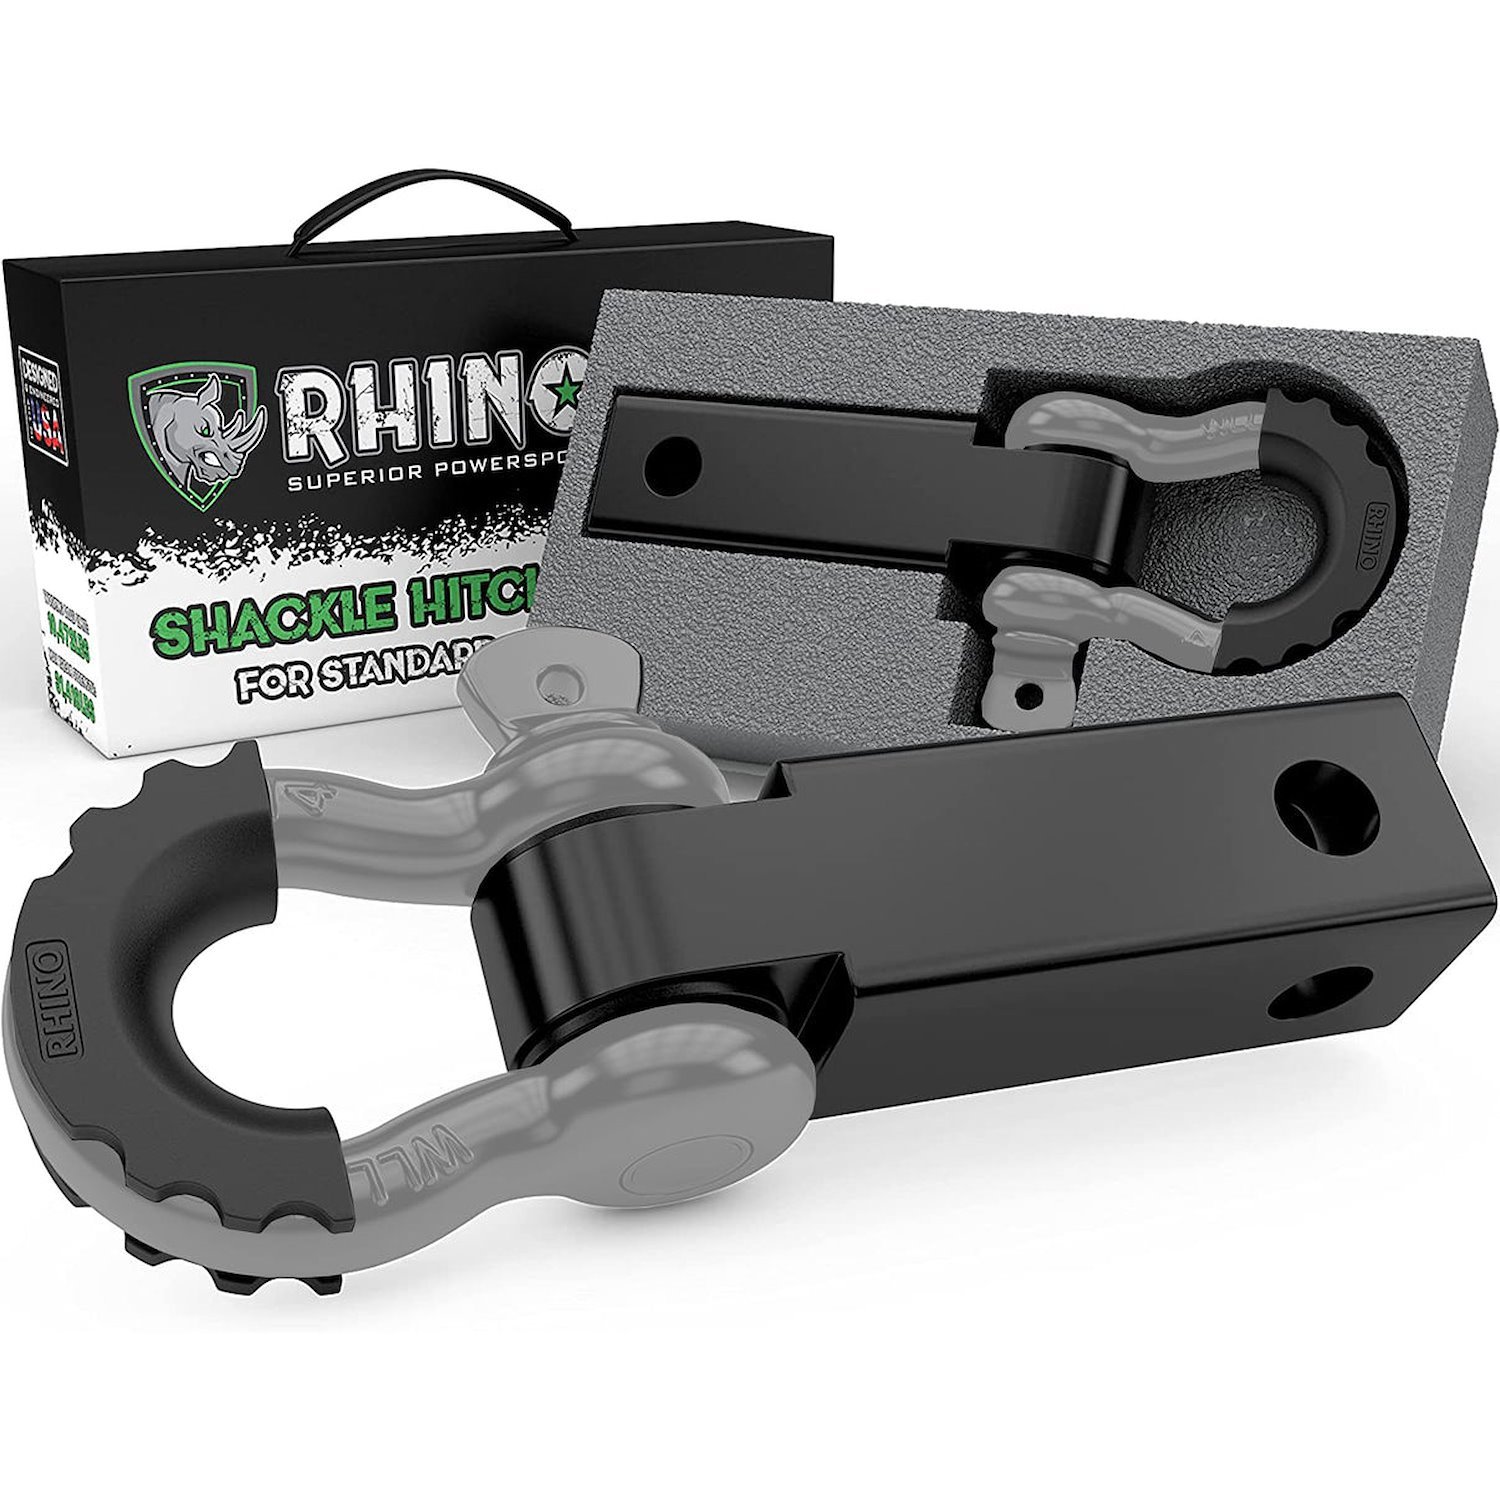 RG-HTHITCH2-GRY Shackle Hitch Receiver W/ D-Ring [Gray]